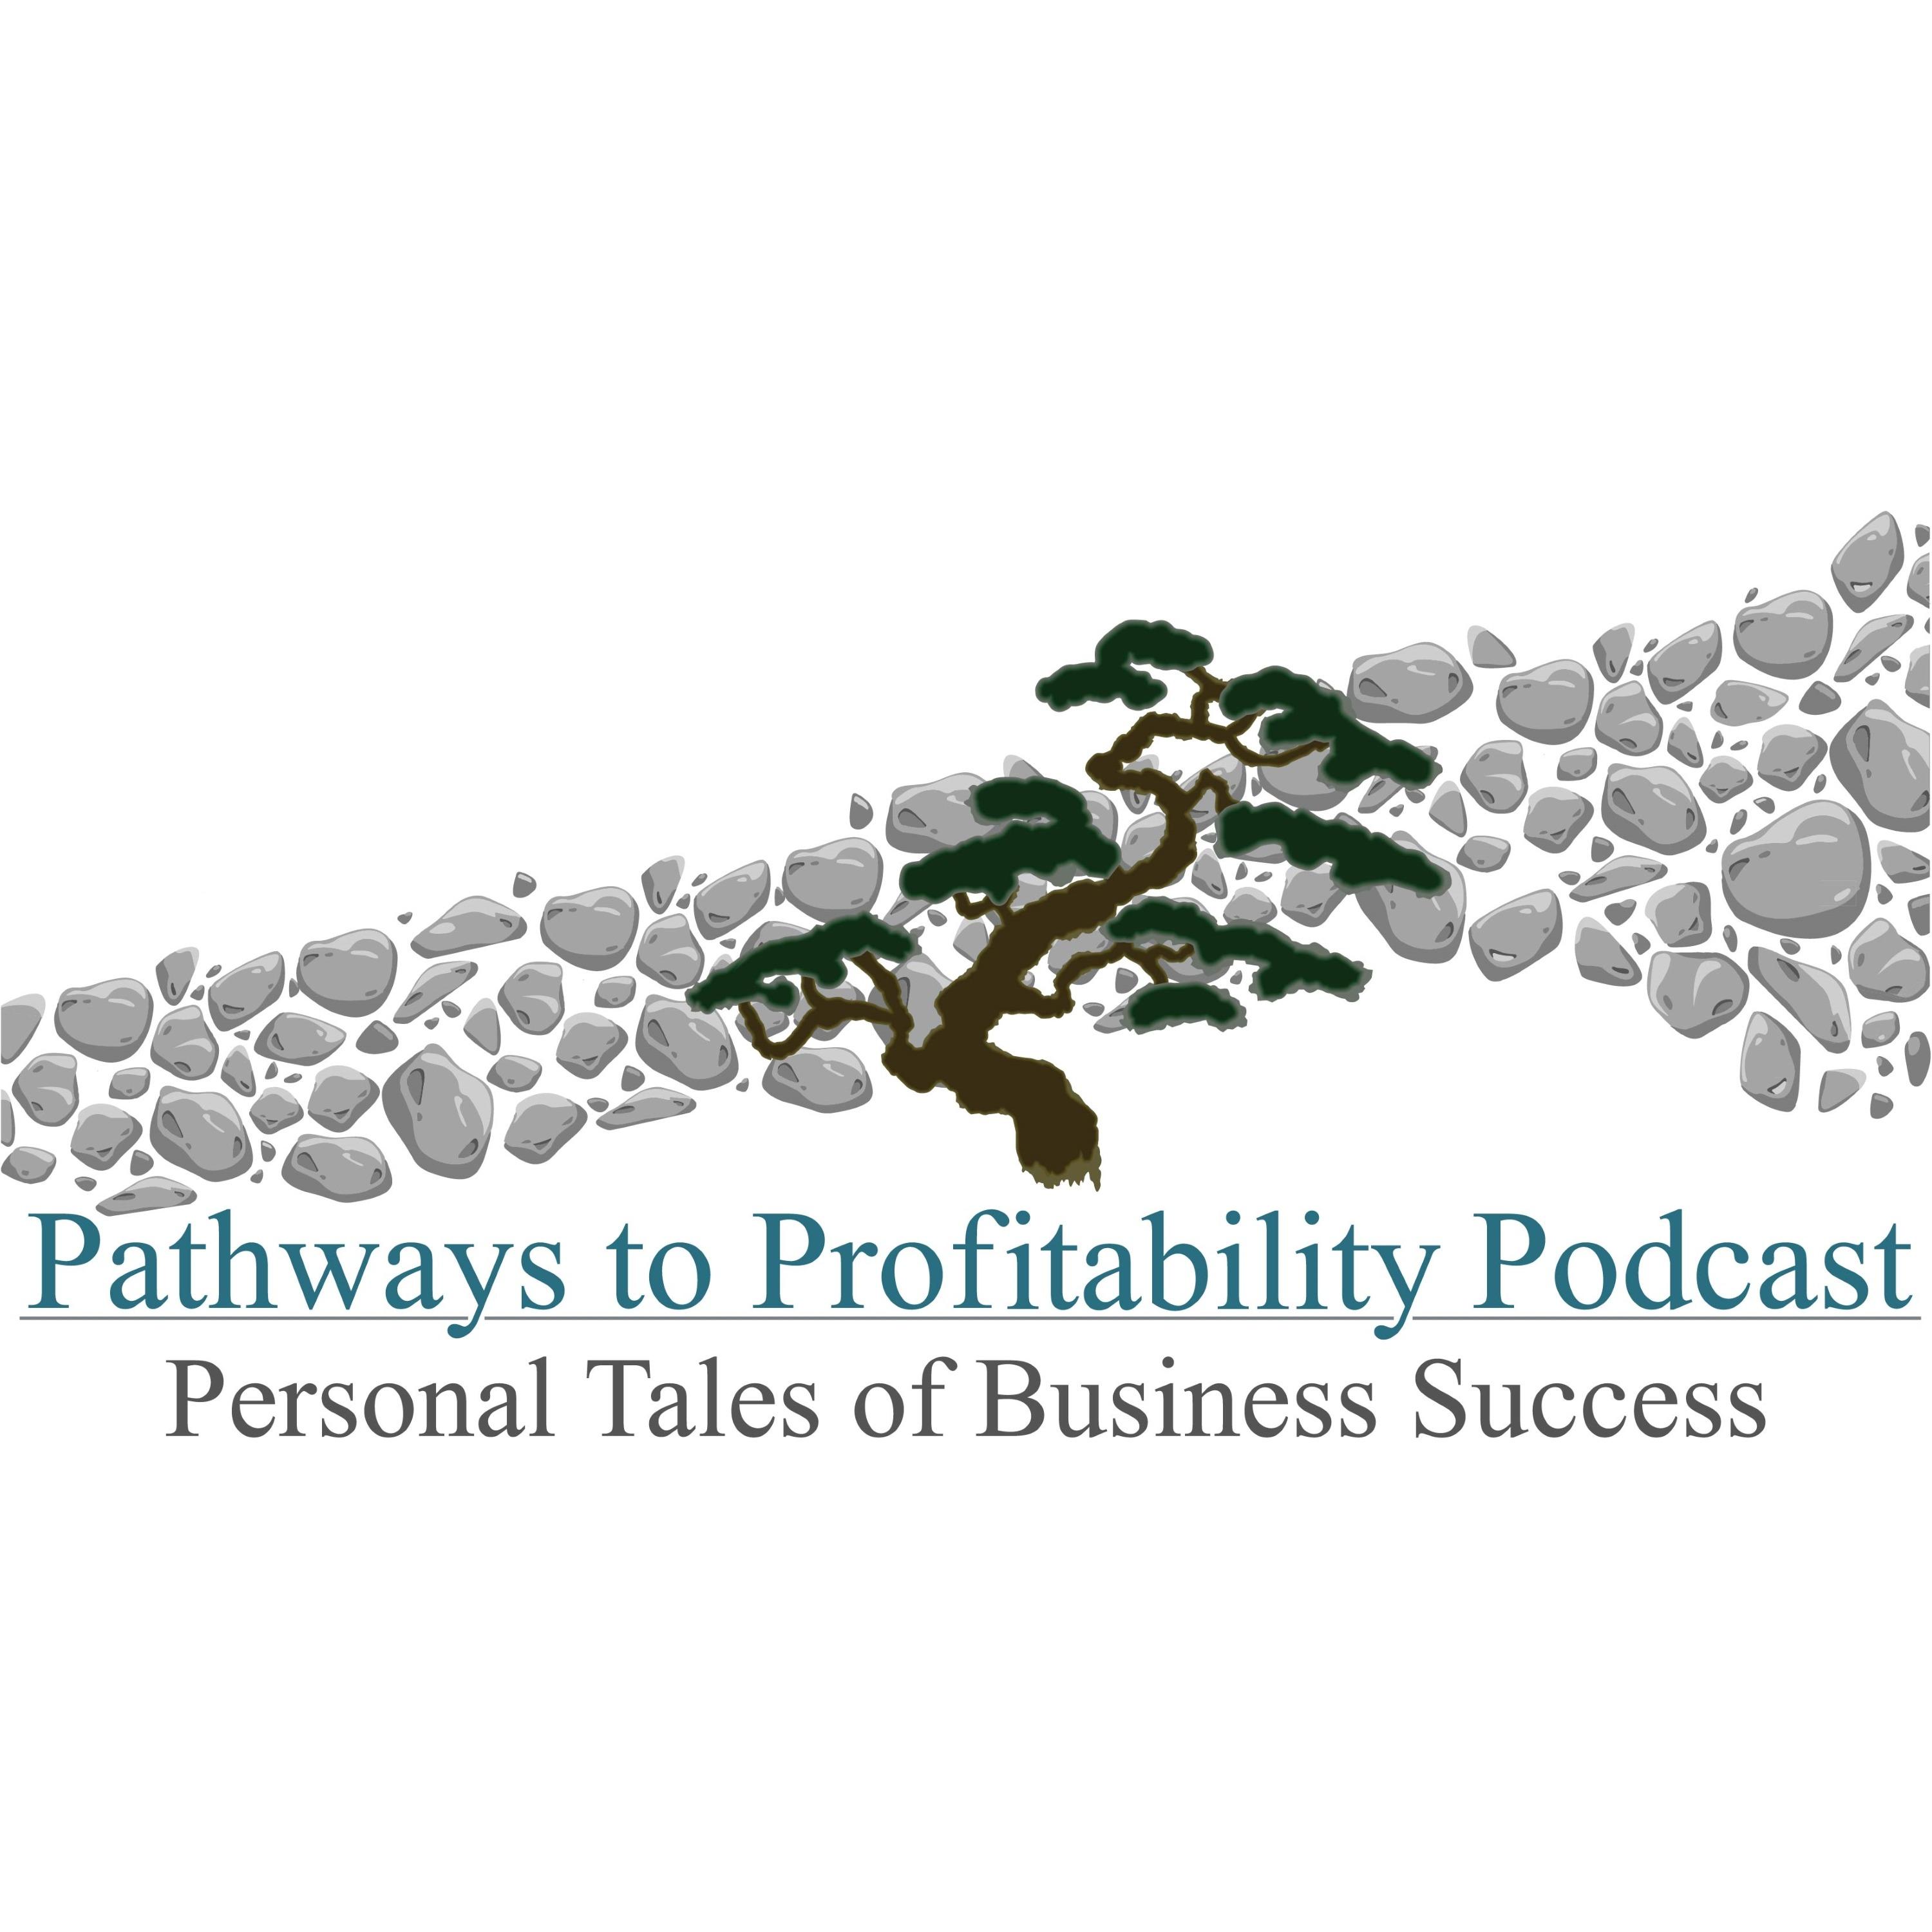 Pathways to Profitability Podcast: Personal Tales of Business Success